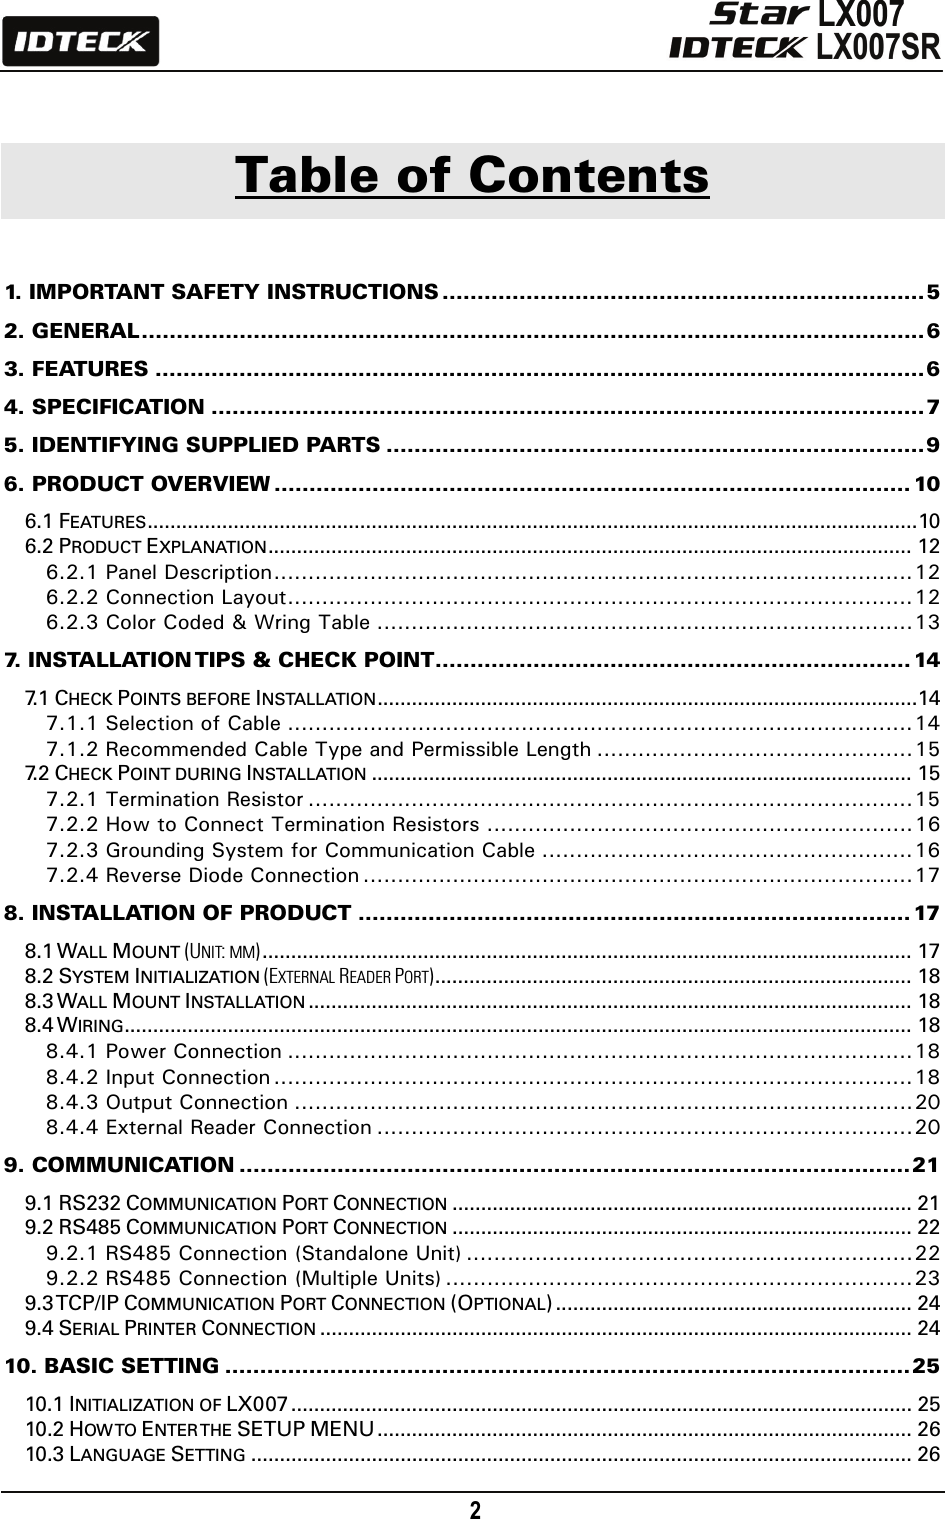                                                                                    2         Table of Contents  1. IMPORTANT SAFETY INSTRUCTIONS .....................................................................5 2. GENERAL................................................................................................................6 3. FEATURES ..............................................................................................................6 4. SPECIFICATION ......................................................................................................7 5. IDENTIFYING SUPPLIED PARTS .............................................................................9 6. PRODUCT OVERVIEW ........................................................................................... 10 6.1 FEATURES......................................................................................................................................10 6.2 PRODUCT EXPLANATION................................................................................................................ 12 6.2.1 Panel Description.............................................................................................12 6.2.2 Connection Layout...........................................................................................12 6.2.3 Color Coded &amp; Wring Table ..............................................................................13 7. INSTALLATION TIPS &amp; CHECK POINT.................................................................... 14 7. 1  CHECK POINTS BEFORE INSTALLATION..............................................................................................14 7.1.1 Selection of Cable ...........................................................................................14 7.1.2 Recommended Cable Type and Permissible Length ..............................................15 7. 2  CHECK POINT DURING INSTALLATION .............................................................................................. 15 7.2.1 Termination Resistor ........................................................................................15 7.2.2 How to Connect Termination Resistors ..............................................................16 7.2.3 Grounding System for Communication Cable ......................................................16 7.2.4 Reverse Diode Connection ................................................................................17 8. INSTALLATION OF PRODUCT ...............................................................................17 8.1 WALL MOUNT (UNIT: MM)................................................................................................................. 17 8.2 SYSTEM INITIALIZATION (EXTERNAL READER PORT)................................................................................... 18 8.3 WALL MOUNT INSTALLATION ......................................................................................................... 18 8.4 WIRING......................................................................................................................................... 18 8.4.1 Power Connection ...........................................................................................18 8.4.2 Input Connection .............................................................................................18 8.4.3 Output Connection ..........................................................................................20 8.4.4 External Reader Connection ..............................................................................20 9. COMMUNICATION ................................................................................................21 9.1 RS232 COMMUNICATION PORT CONNECTION ................................................................................ 21 9.2 RS485 COMMUNICATION PORT CONNECTION ................................................................................ 22 9.2.1 RS485 Connection (Standalone Unit) .................................................................22 9.2.2 RS485 Connection (Multiple Units) ....................................................................23 9.3 TCP/IP COMMUNICATION PORT CONNECTION (OPTIONAL) .............................................................. 24 9.4 SERIAL PRINTER CONNECTION ....................................................................................................... 24 10. BASIC SETTING ..................................................................................................25 10.1 INITIALIZATION OF LX007 ............................................................................................................ 25 10.2 HOW TO  ENTER THE  SETUP MENU............................................................................................. 26 10.3 LANGUAGE SETTING ................................................................................................................... 26 